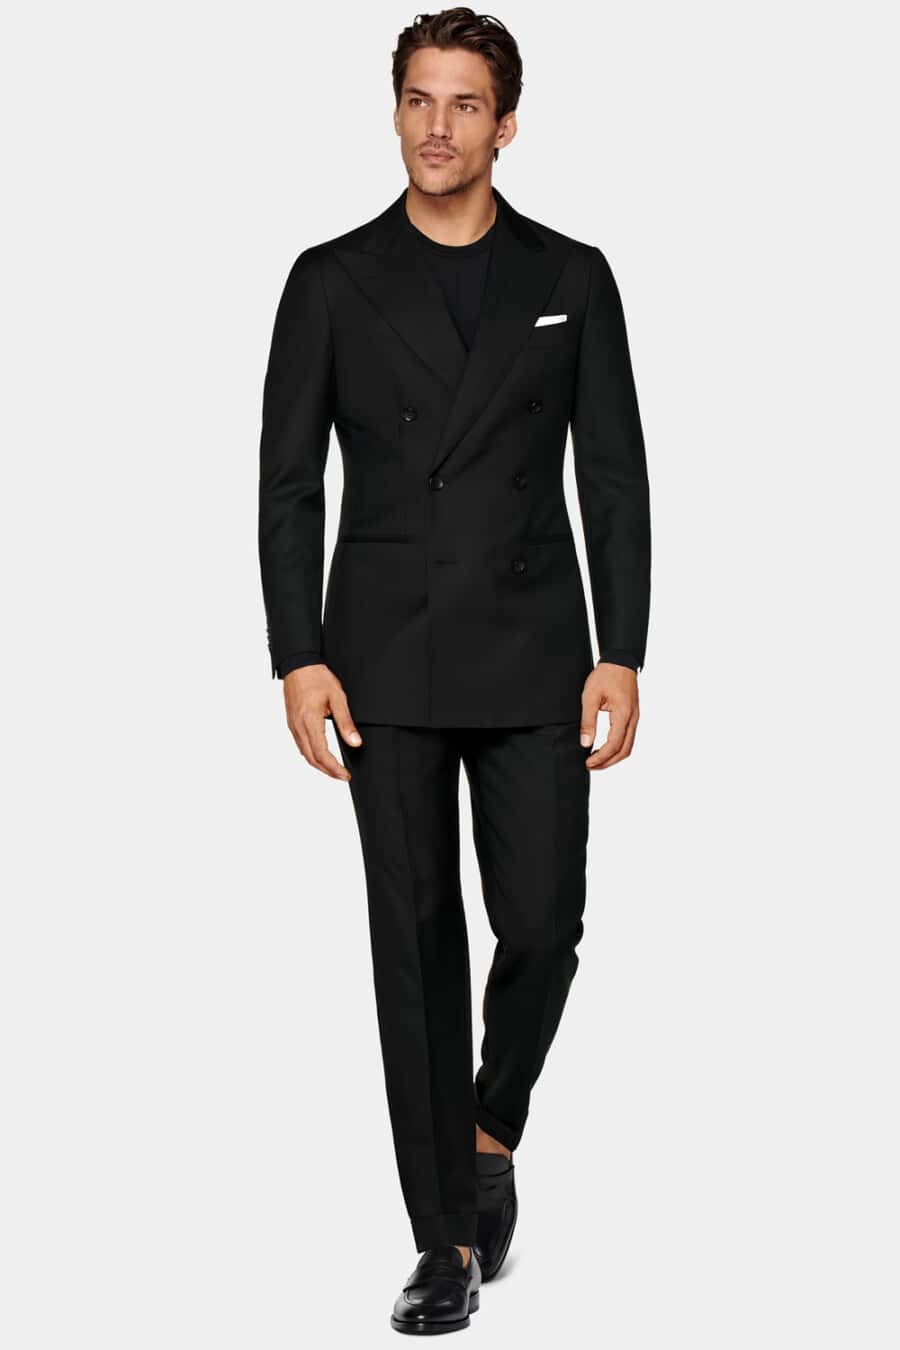 Men's black double-breasted suit, black T-shirt and black leather penny loafers worn sockless outfit